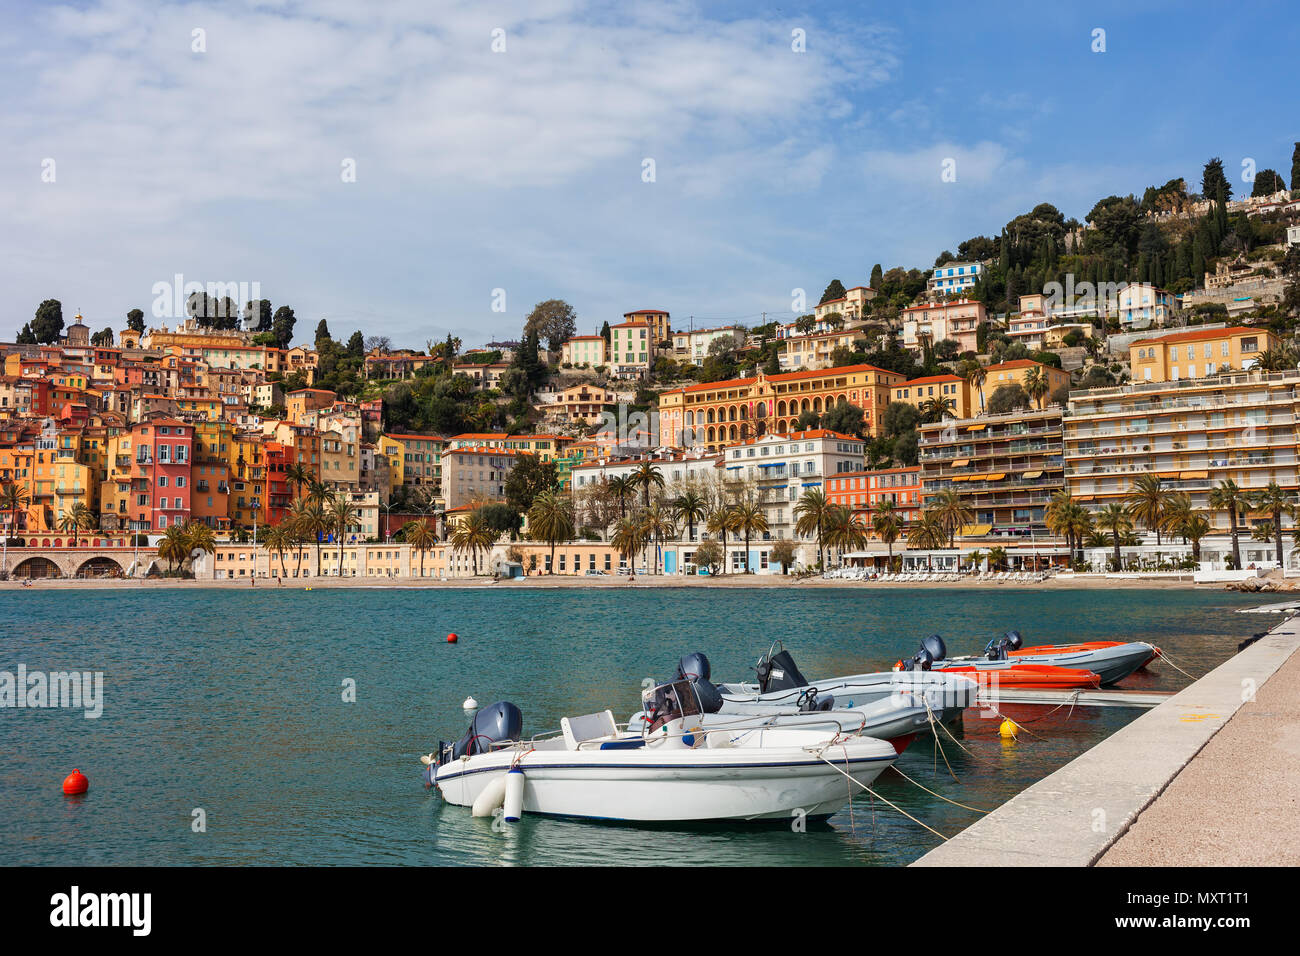 France, Cote d'Azur, Menton skyline and boats at bay waterfront, resort town on French Riviera at Mediterranean Sea Stock Photo